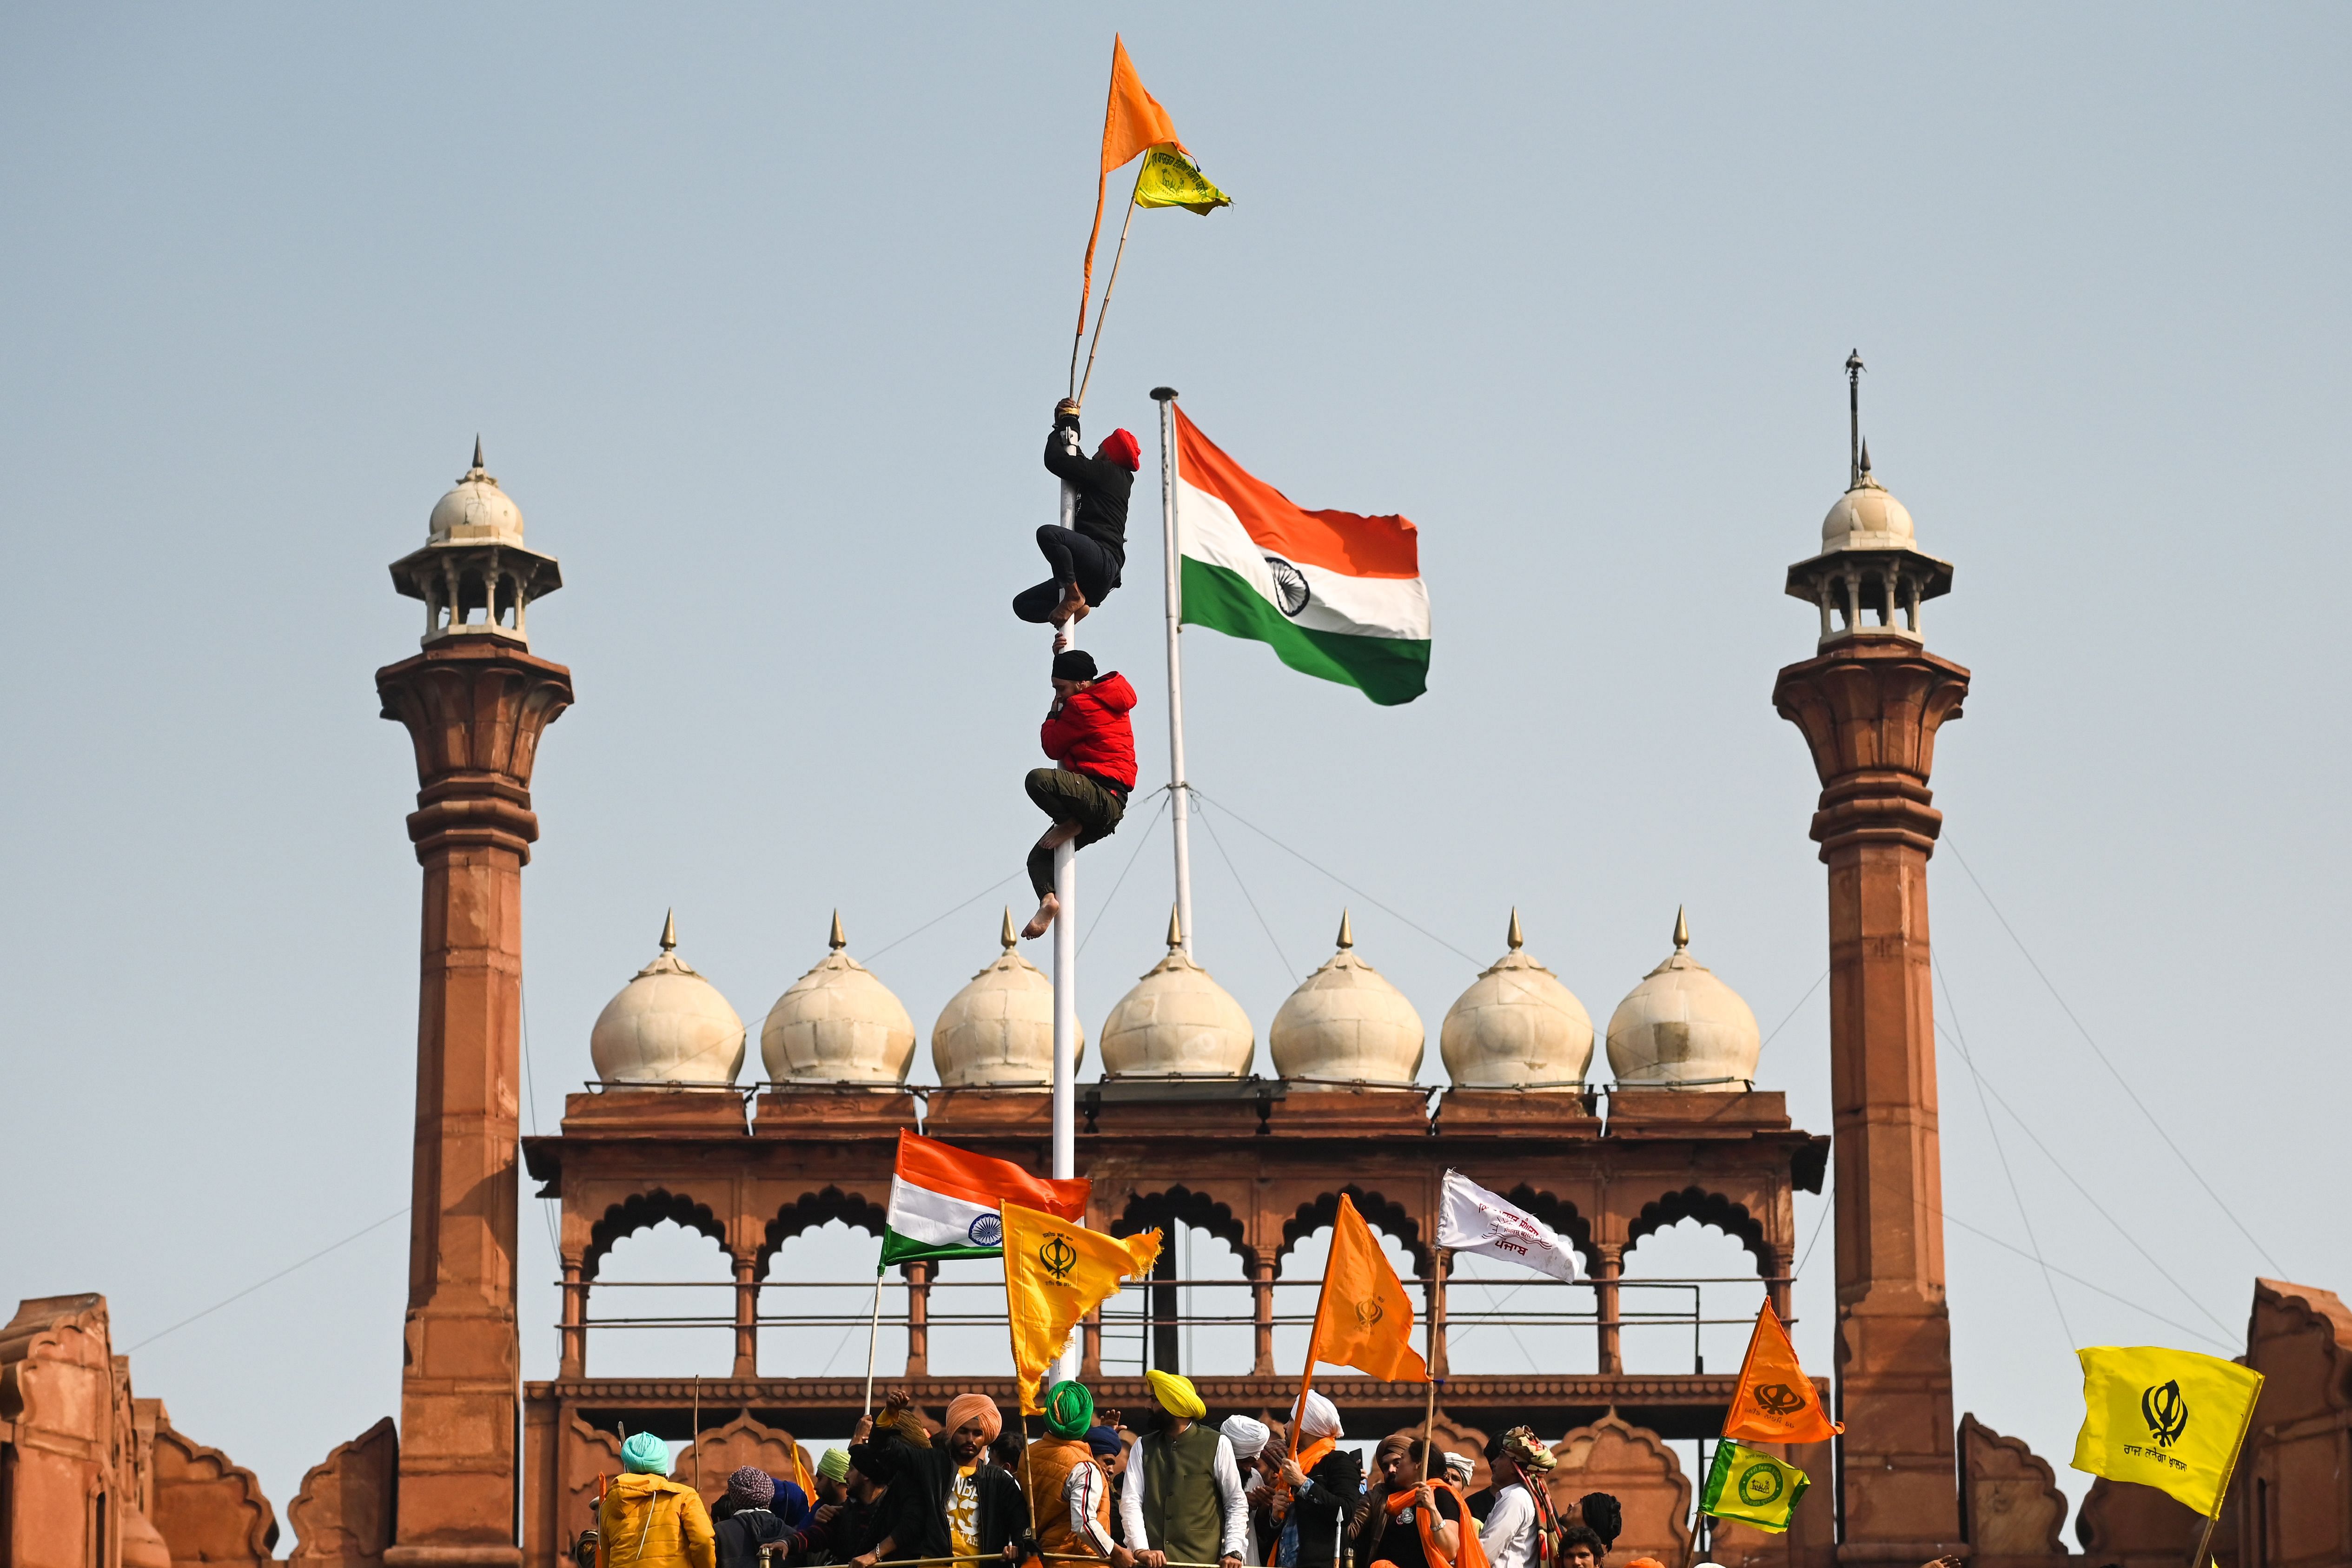 Protesters climb a flagpole at the ramparts of the Red Fort as farmers continue to demonstrate against the central government's recent agricultural reforms in New Delhi on January 26, 2021. Credit: PTI Photo